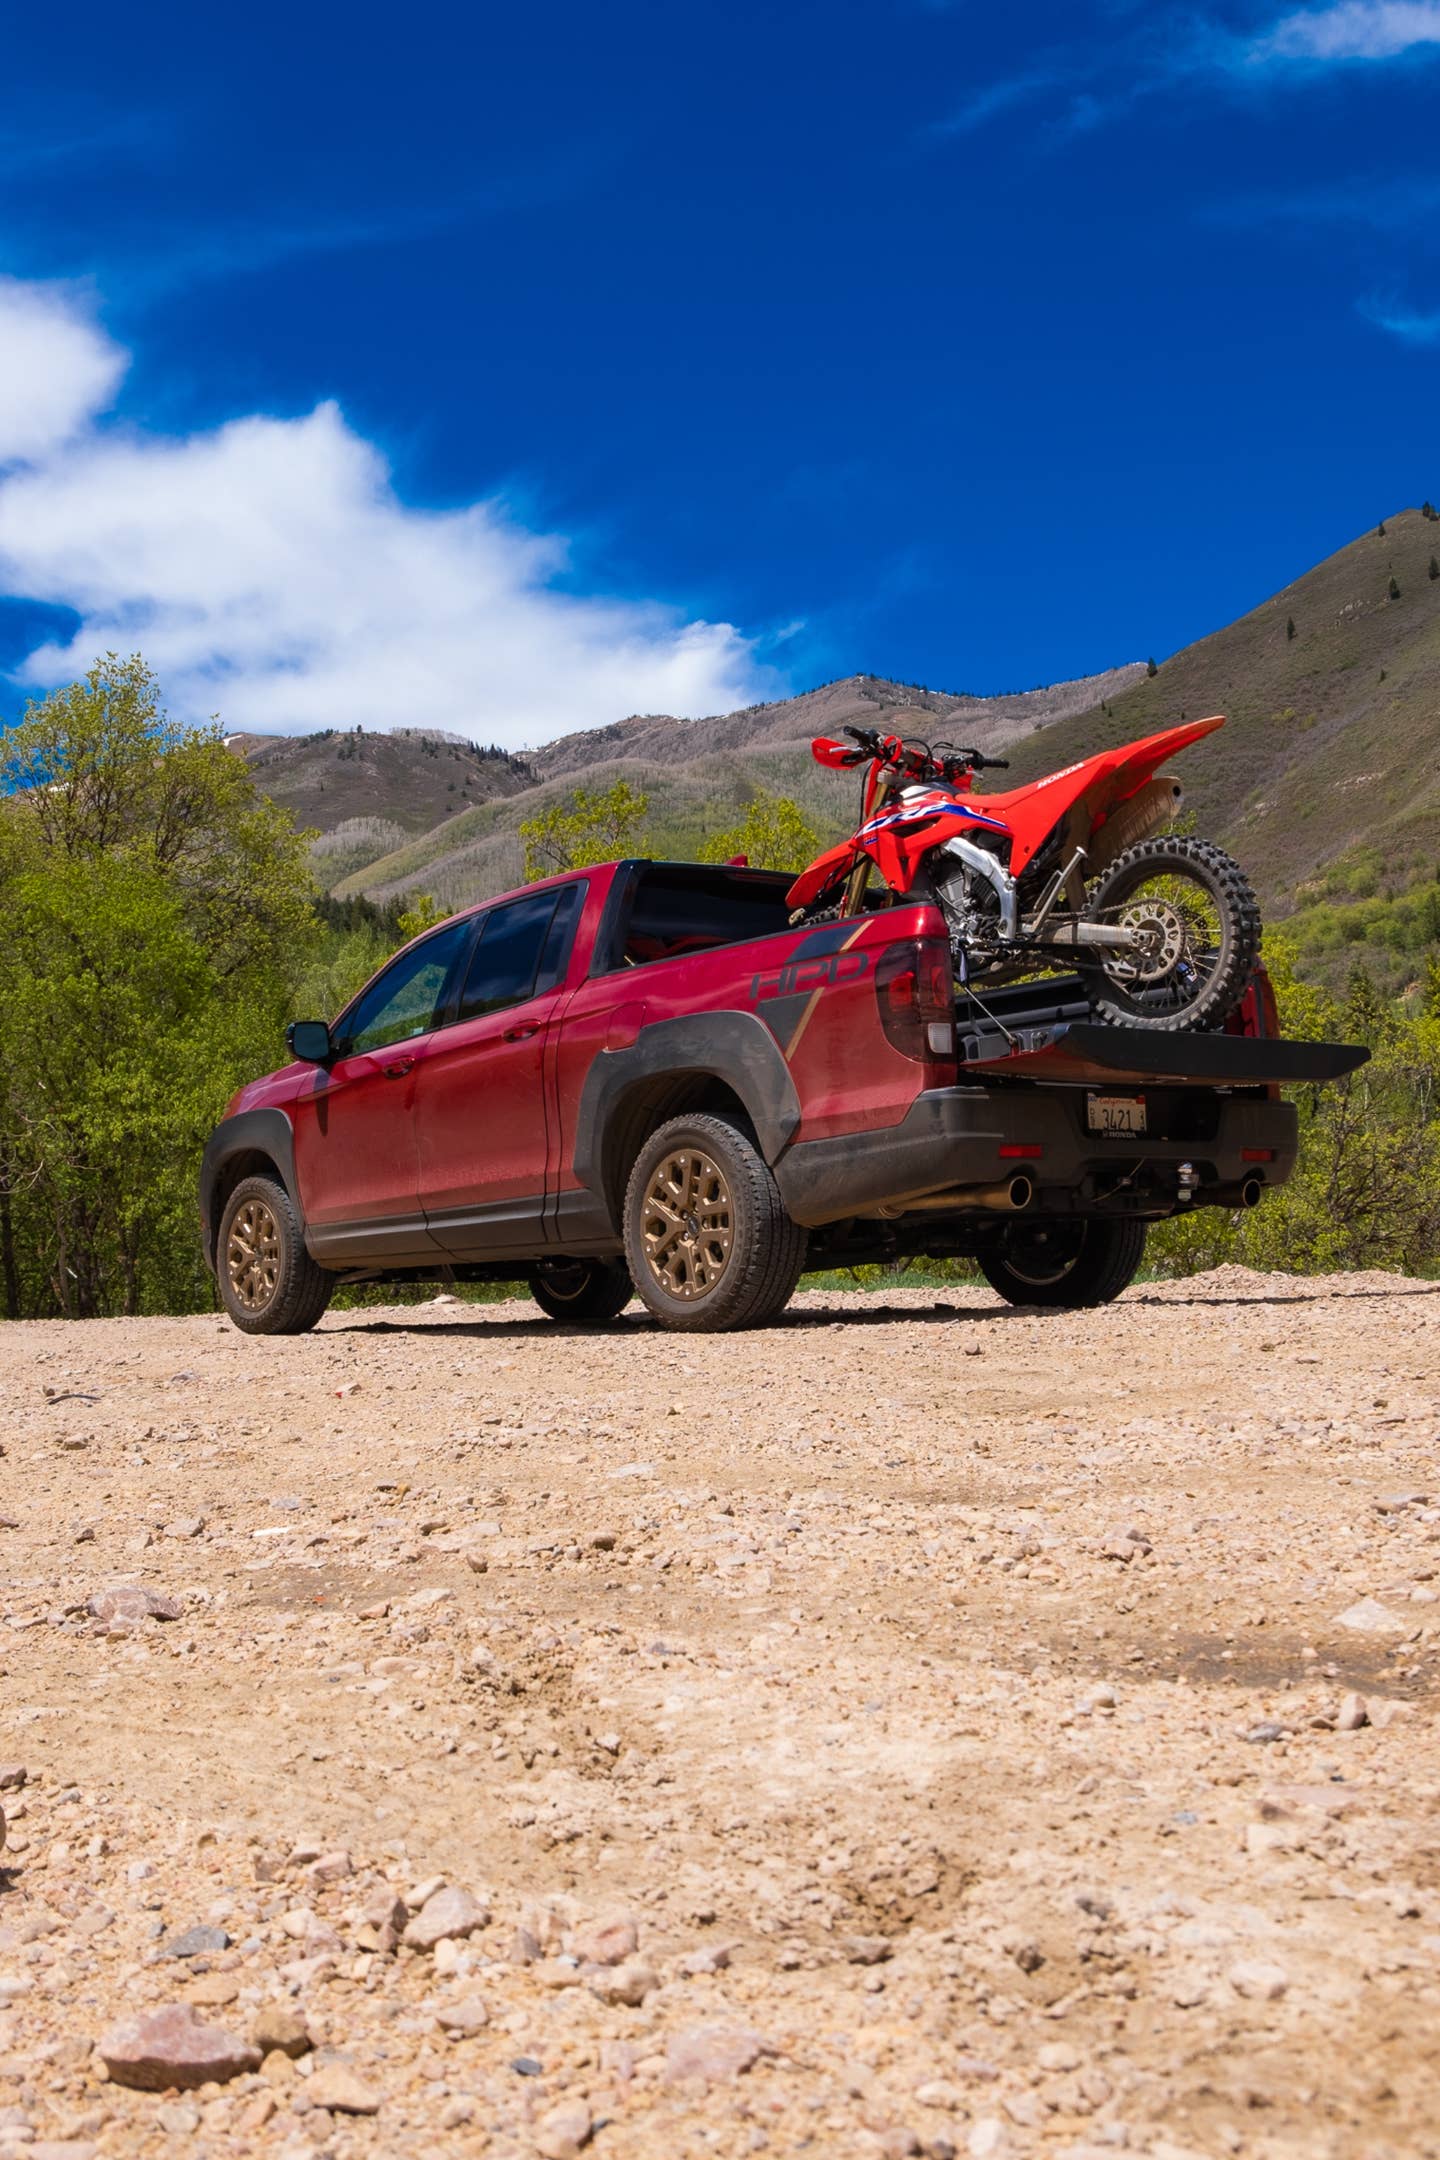 The Ridgeline with a CRF450RX in the bed.